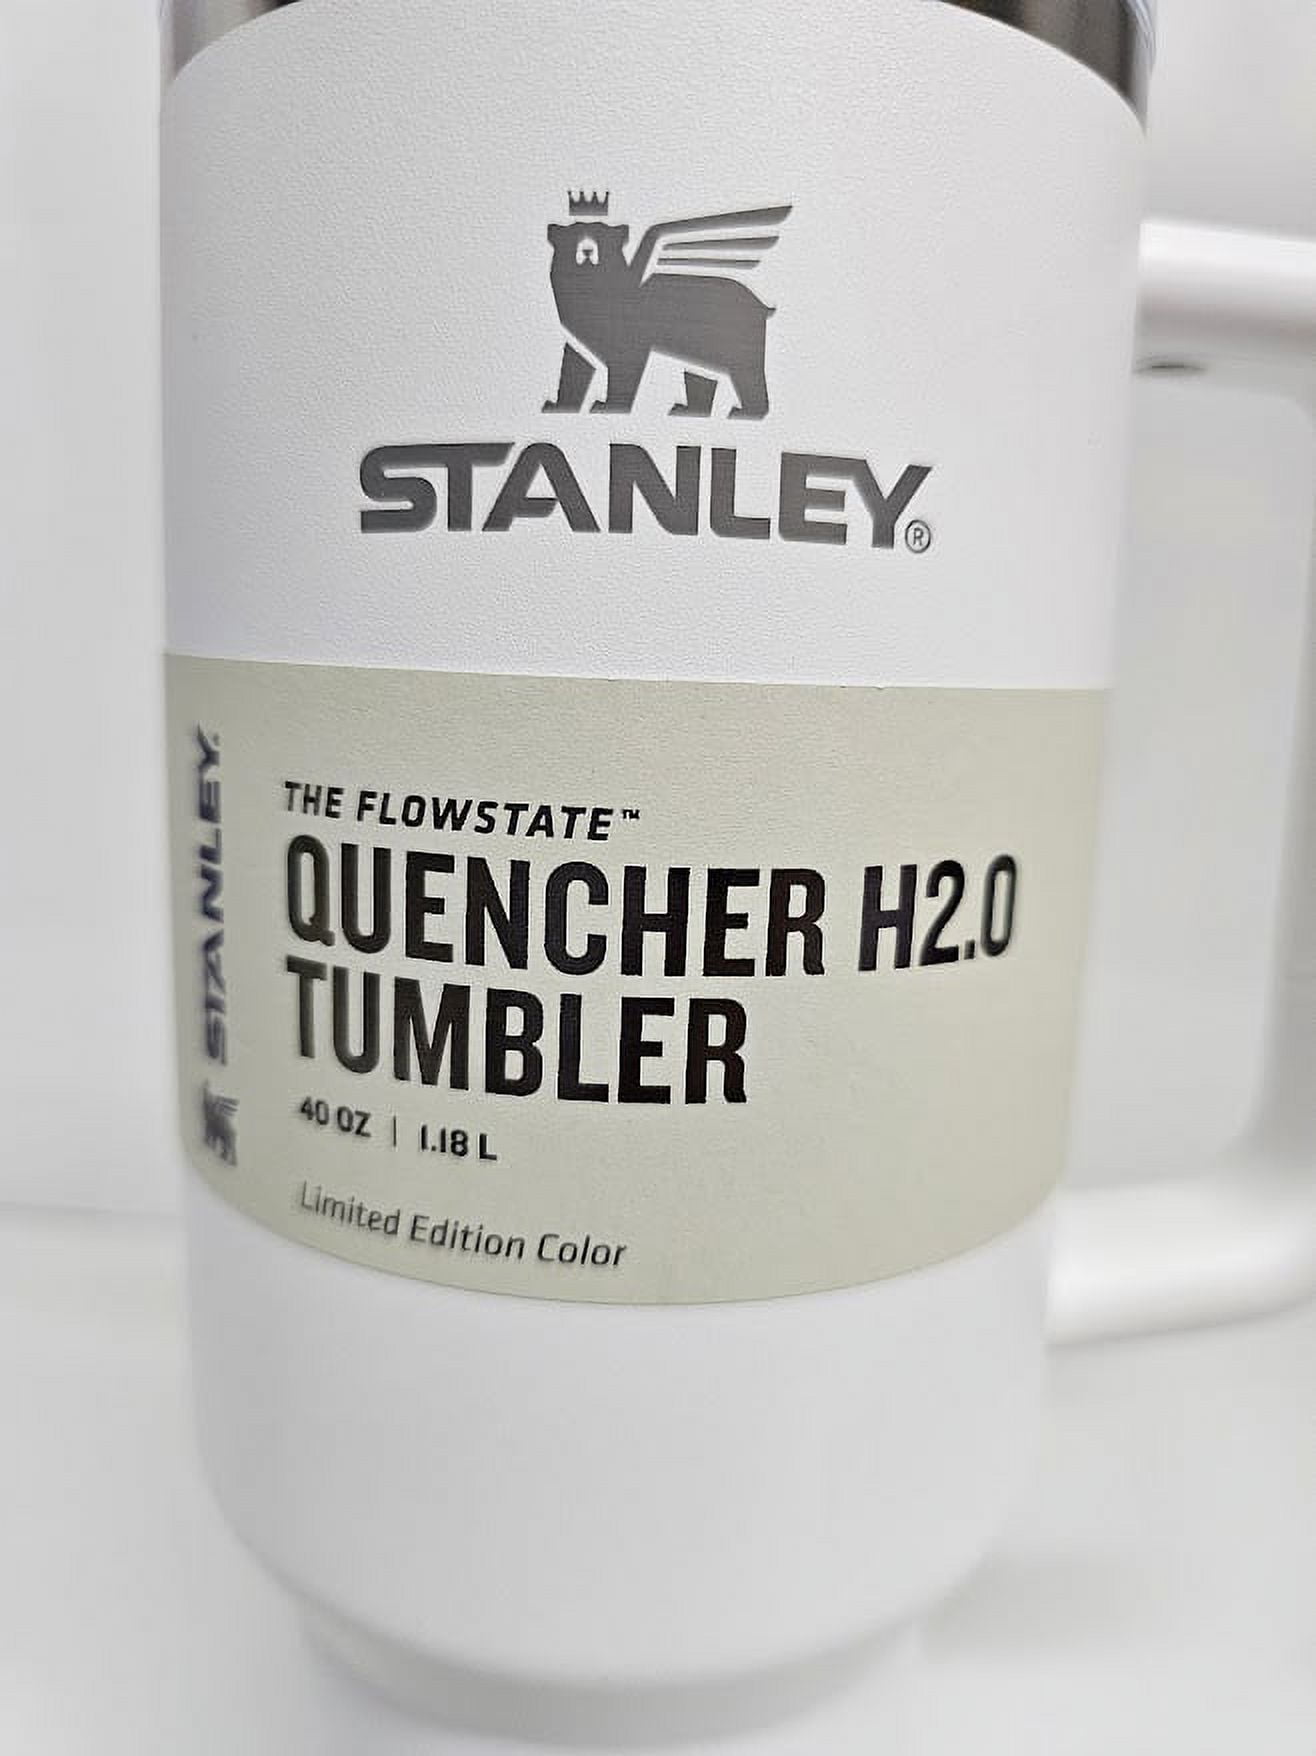 ✨ ALPINE - Stanley 40 oz FlowState Quencher H2.0 Tumbler- NEW / RARE COLOR!